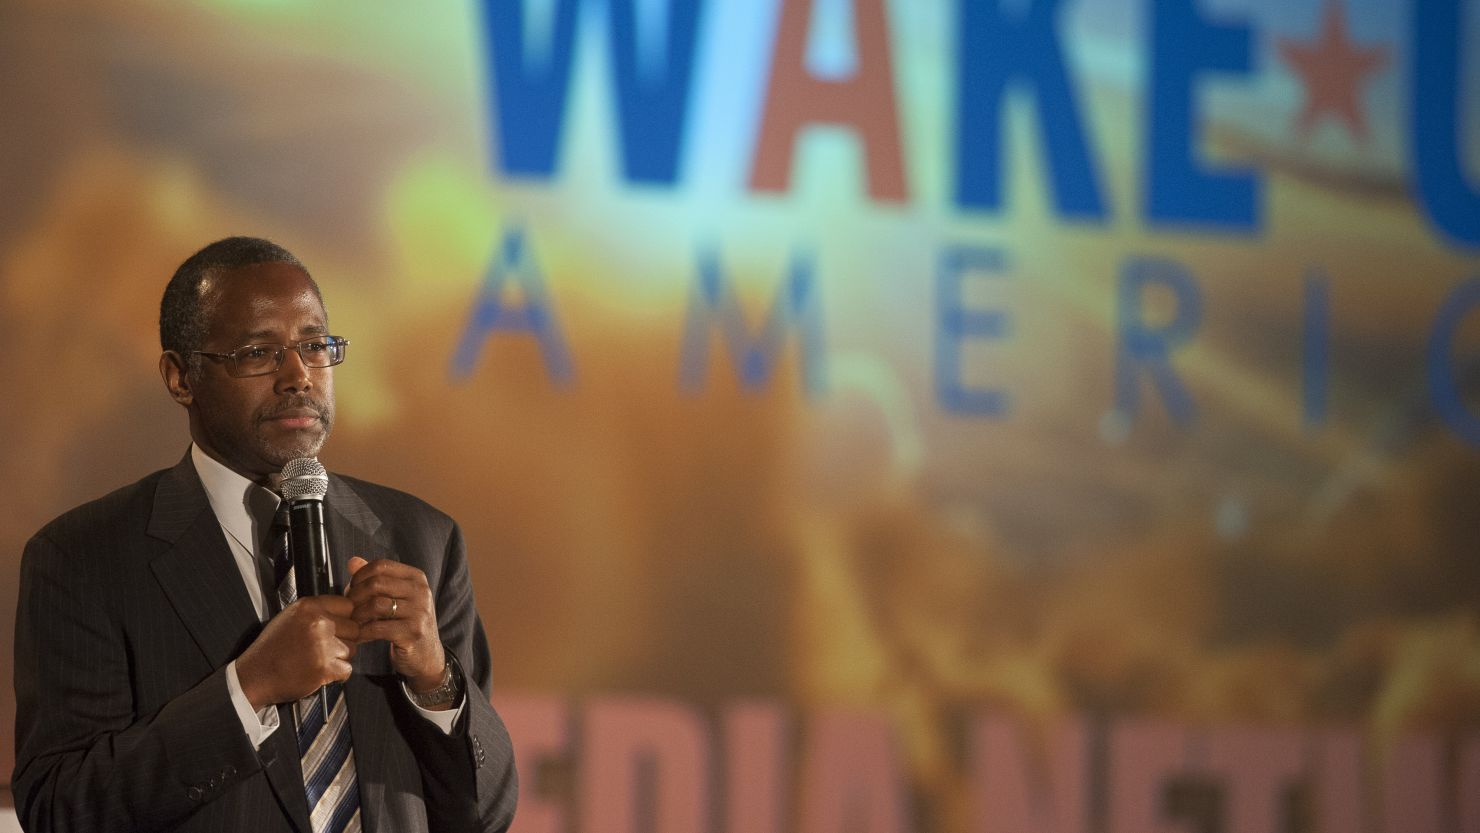 Dr. Ben Carson was the keynote speaker at the Wake Up America gala Event September 5, 2014 in Scottsdale, Arizona.